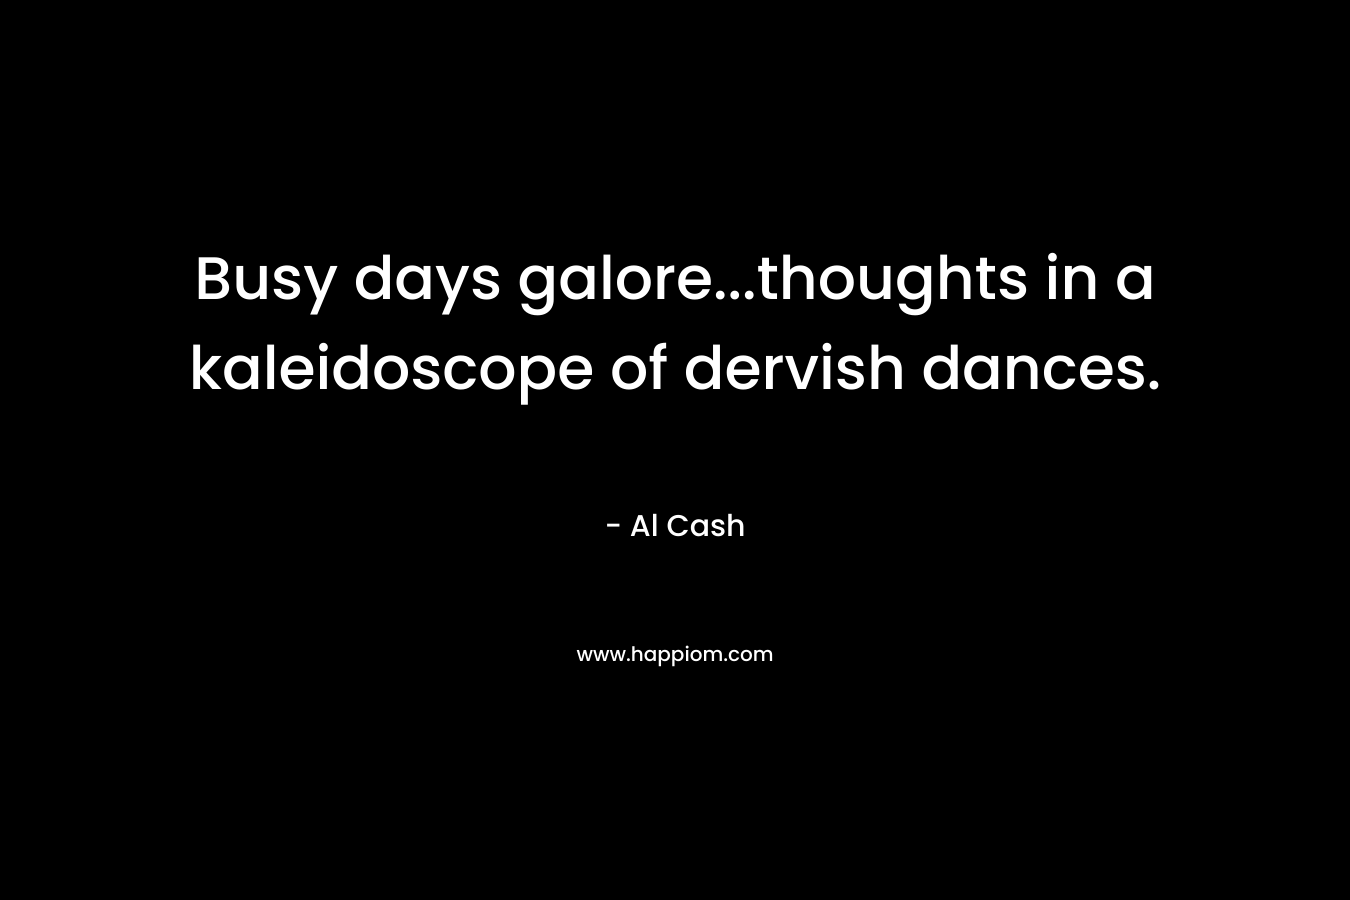 Busy days galore…thoughts in a kaleidoscope of dervish dances. – Al Cash